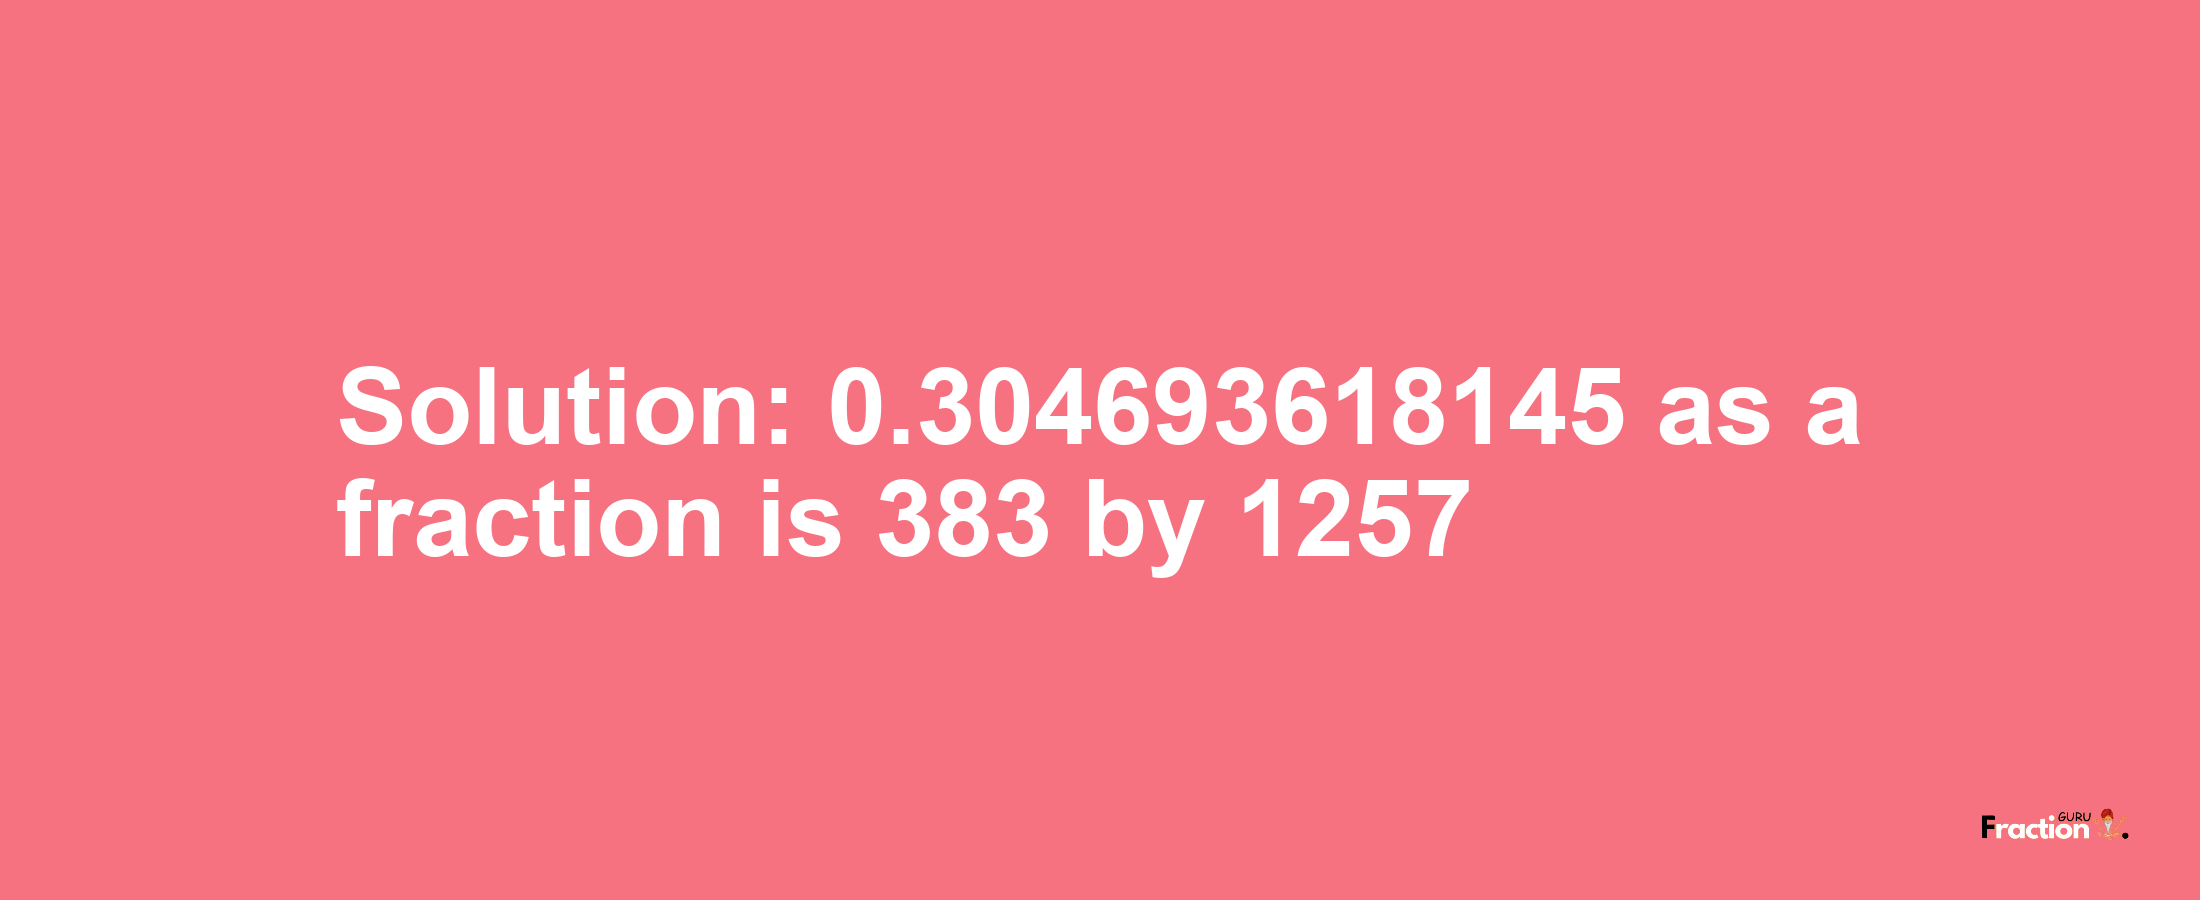 Solution:0.304693618145 as a fraction is 383/1257